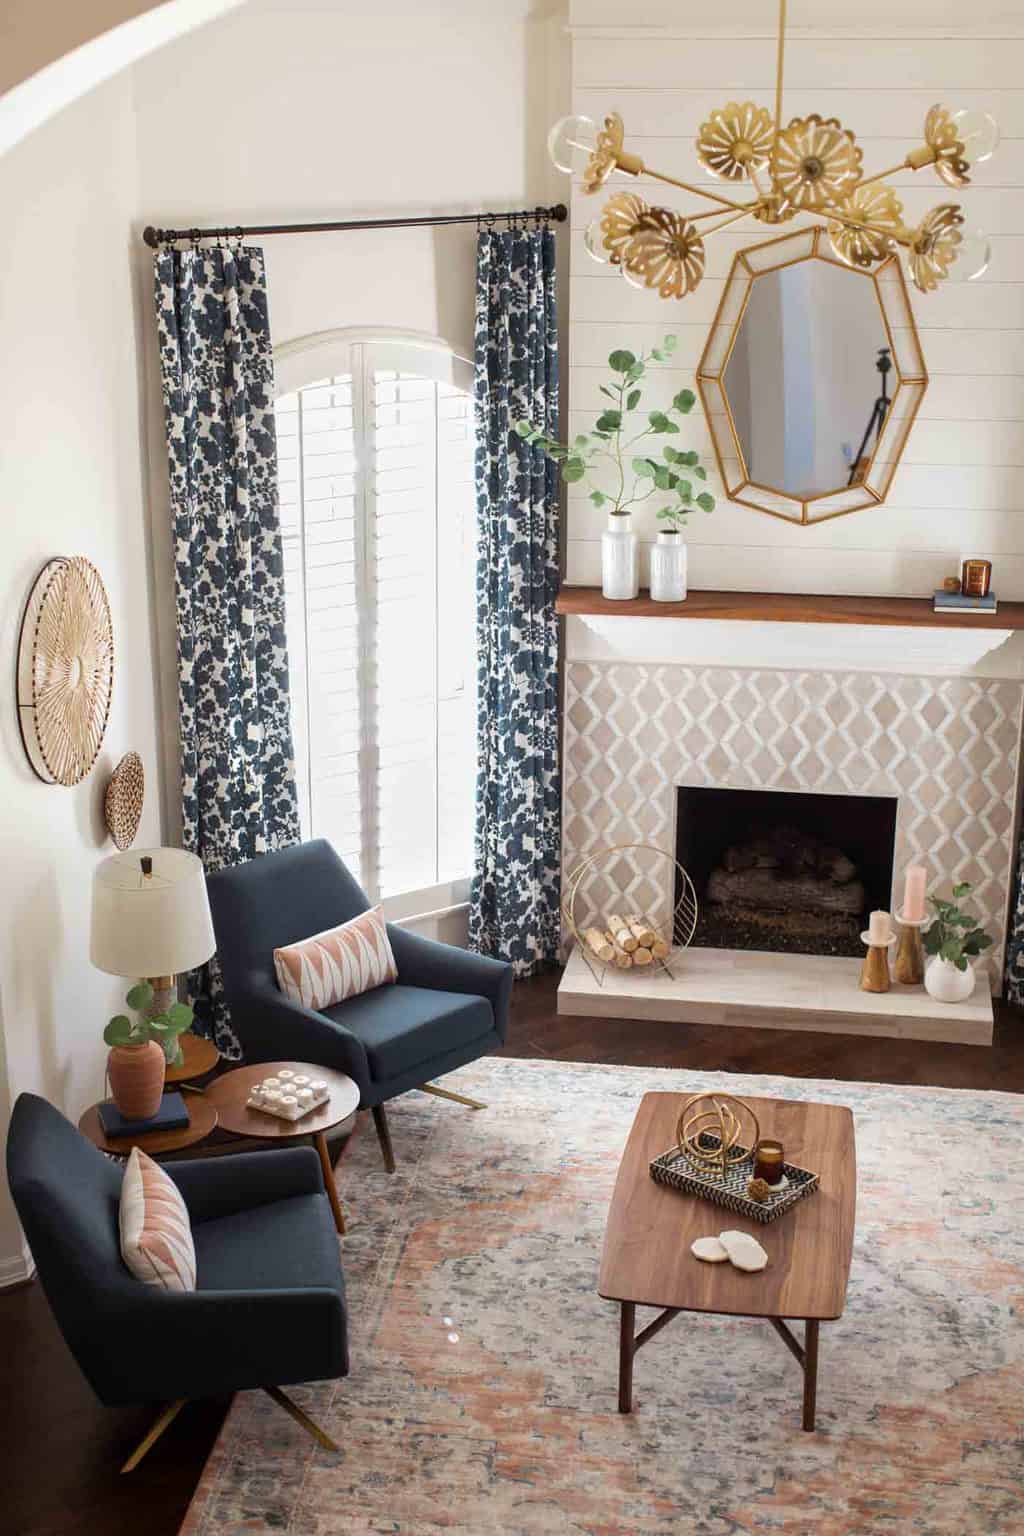 photo of a fireplace makeover idea by Ashley rose of sugar and cloth